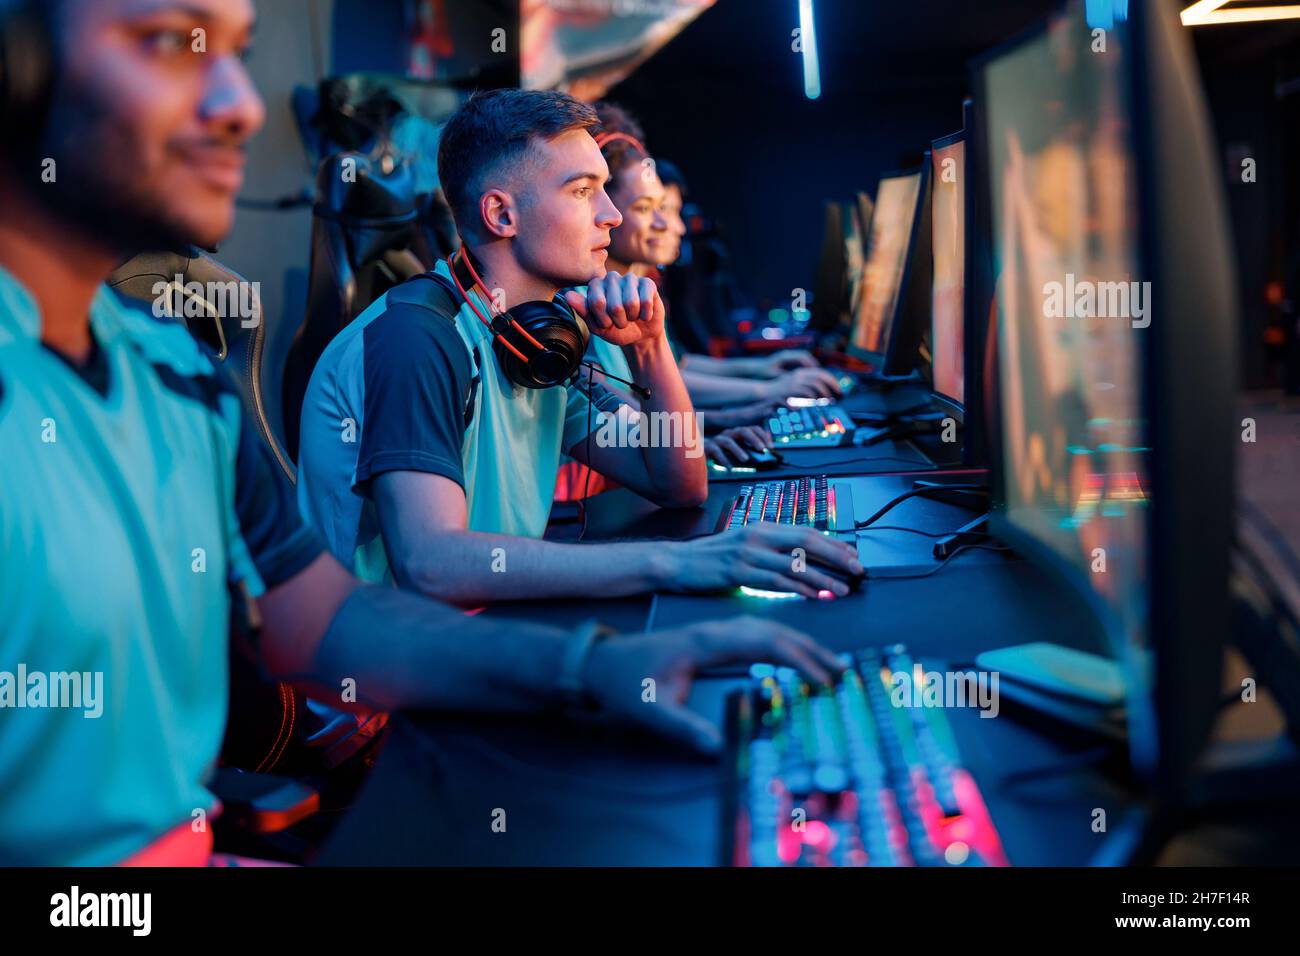 Professional player playing important match in cyber club Stock Photo